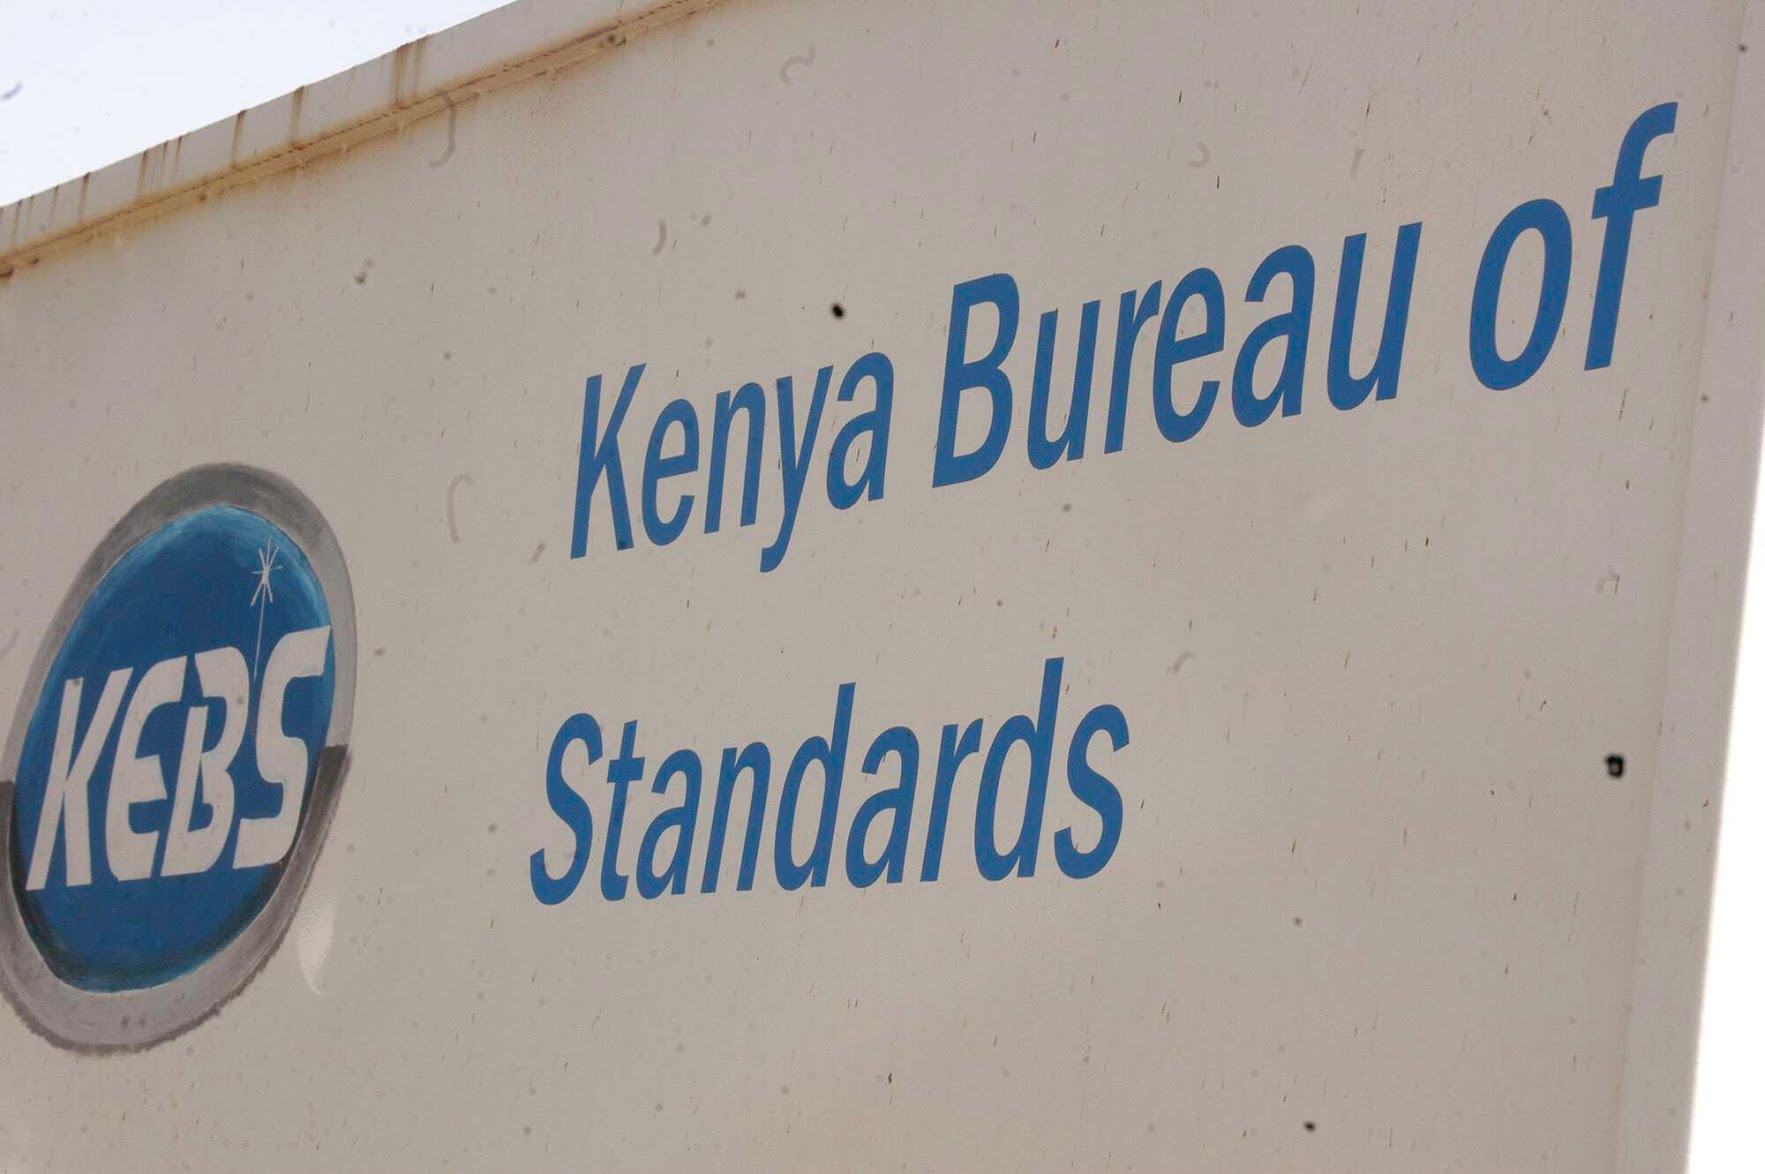 Kebs to pay two lawyer firms Sh144m in Dubai company row